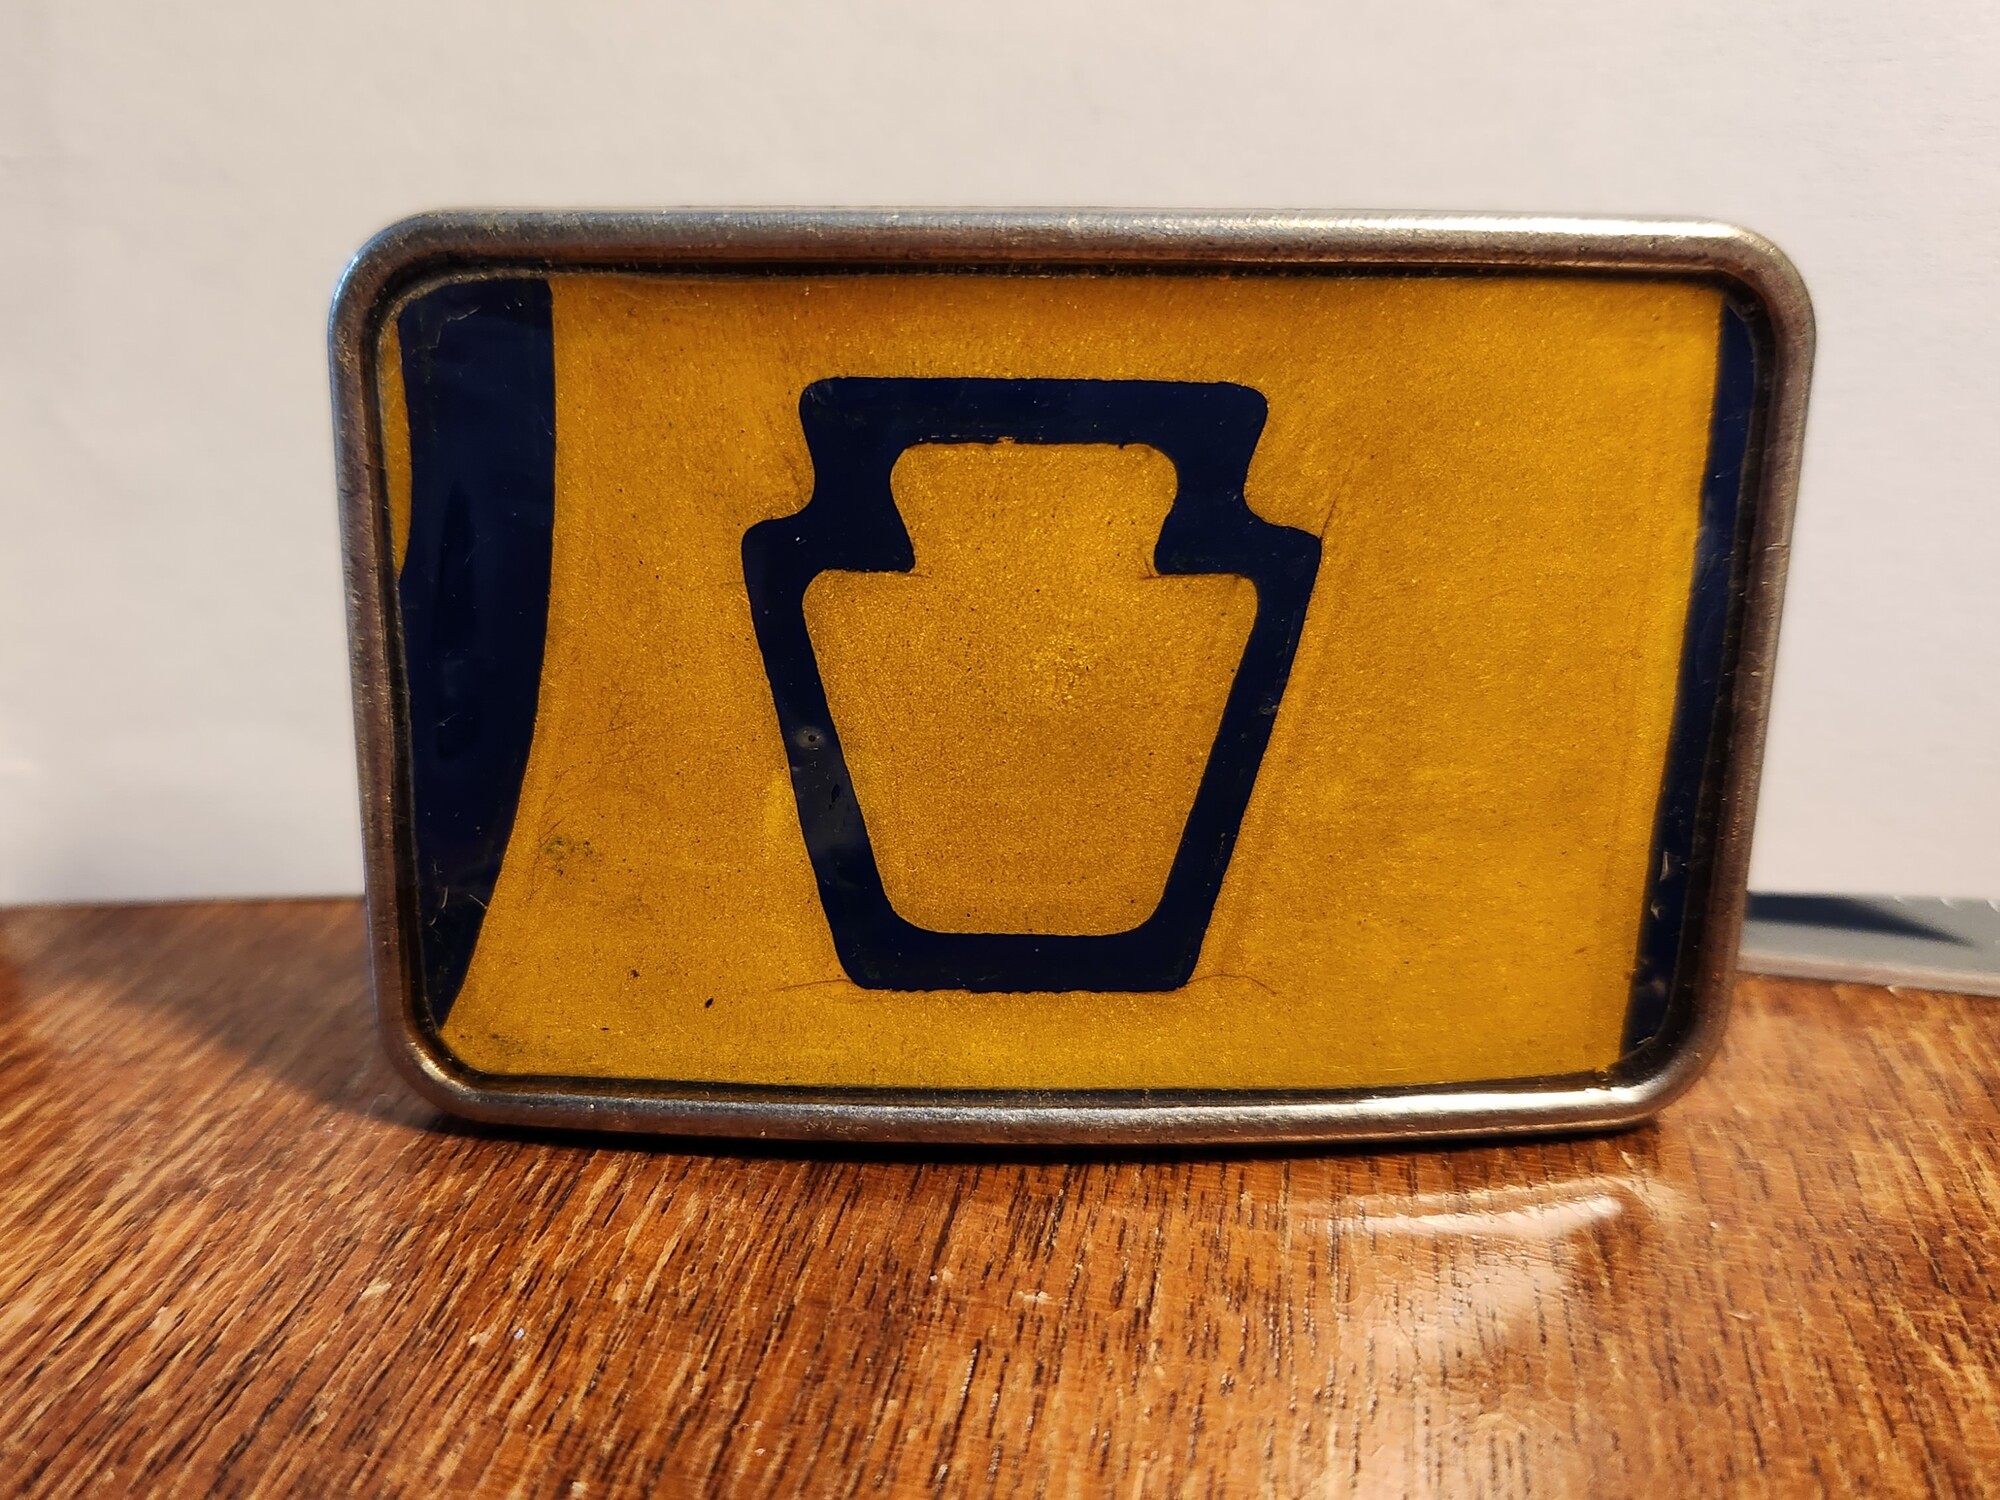 Vintage License Plates have been used to make resin filled belt buckles.
Made by a local friend 10 years ago.  These have not been used and have been stored.  They are approx. 3 x 2 and roughly 1/4 thick.
The belt opening is for a 1.5 wide belt.   They are  a one of a kind find
PLATE FROM PA